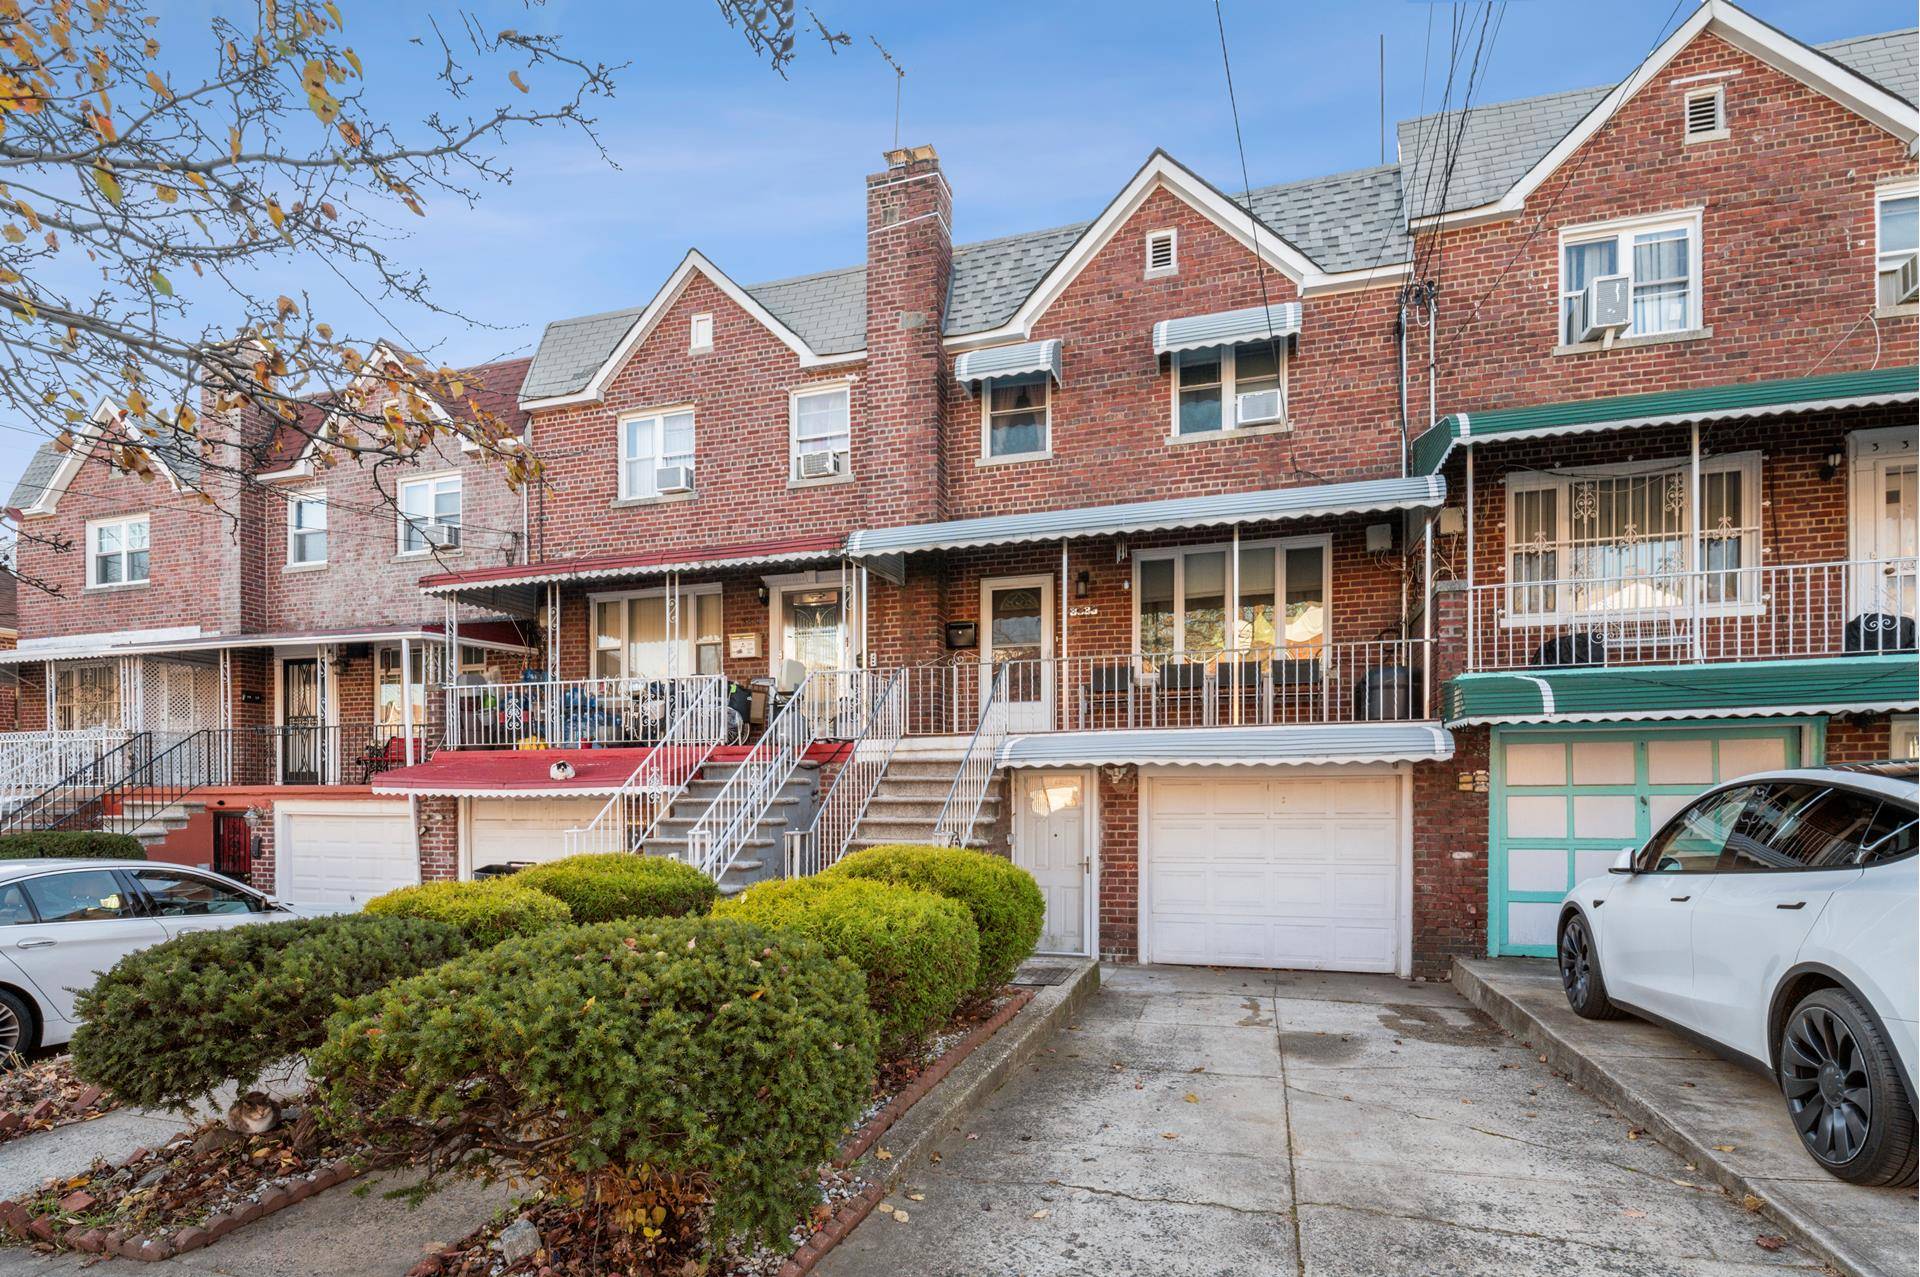 Exceptional Investment Opportunity in East BronxIn the Laconia section of the Bronx, this well maintained two family brick home boasts a 3 bedroom, 1.